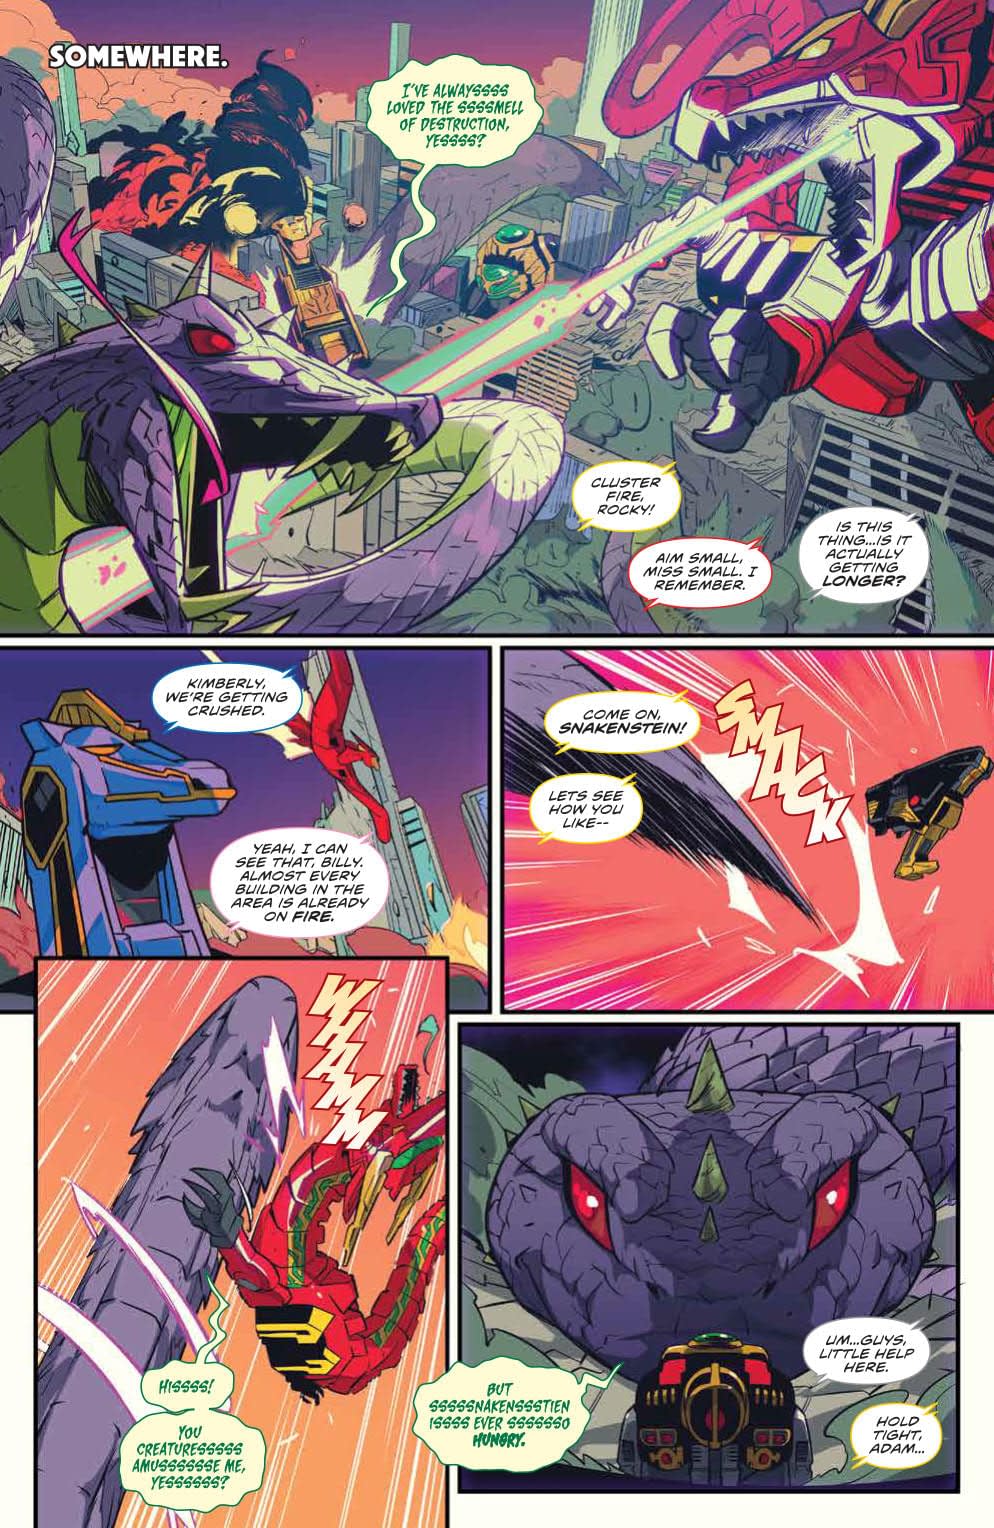 Power Rangers #46 [Preview]